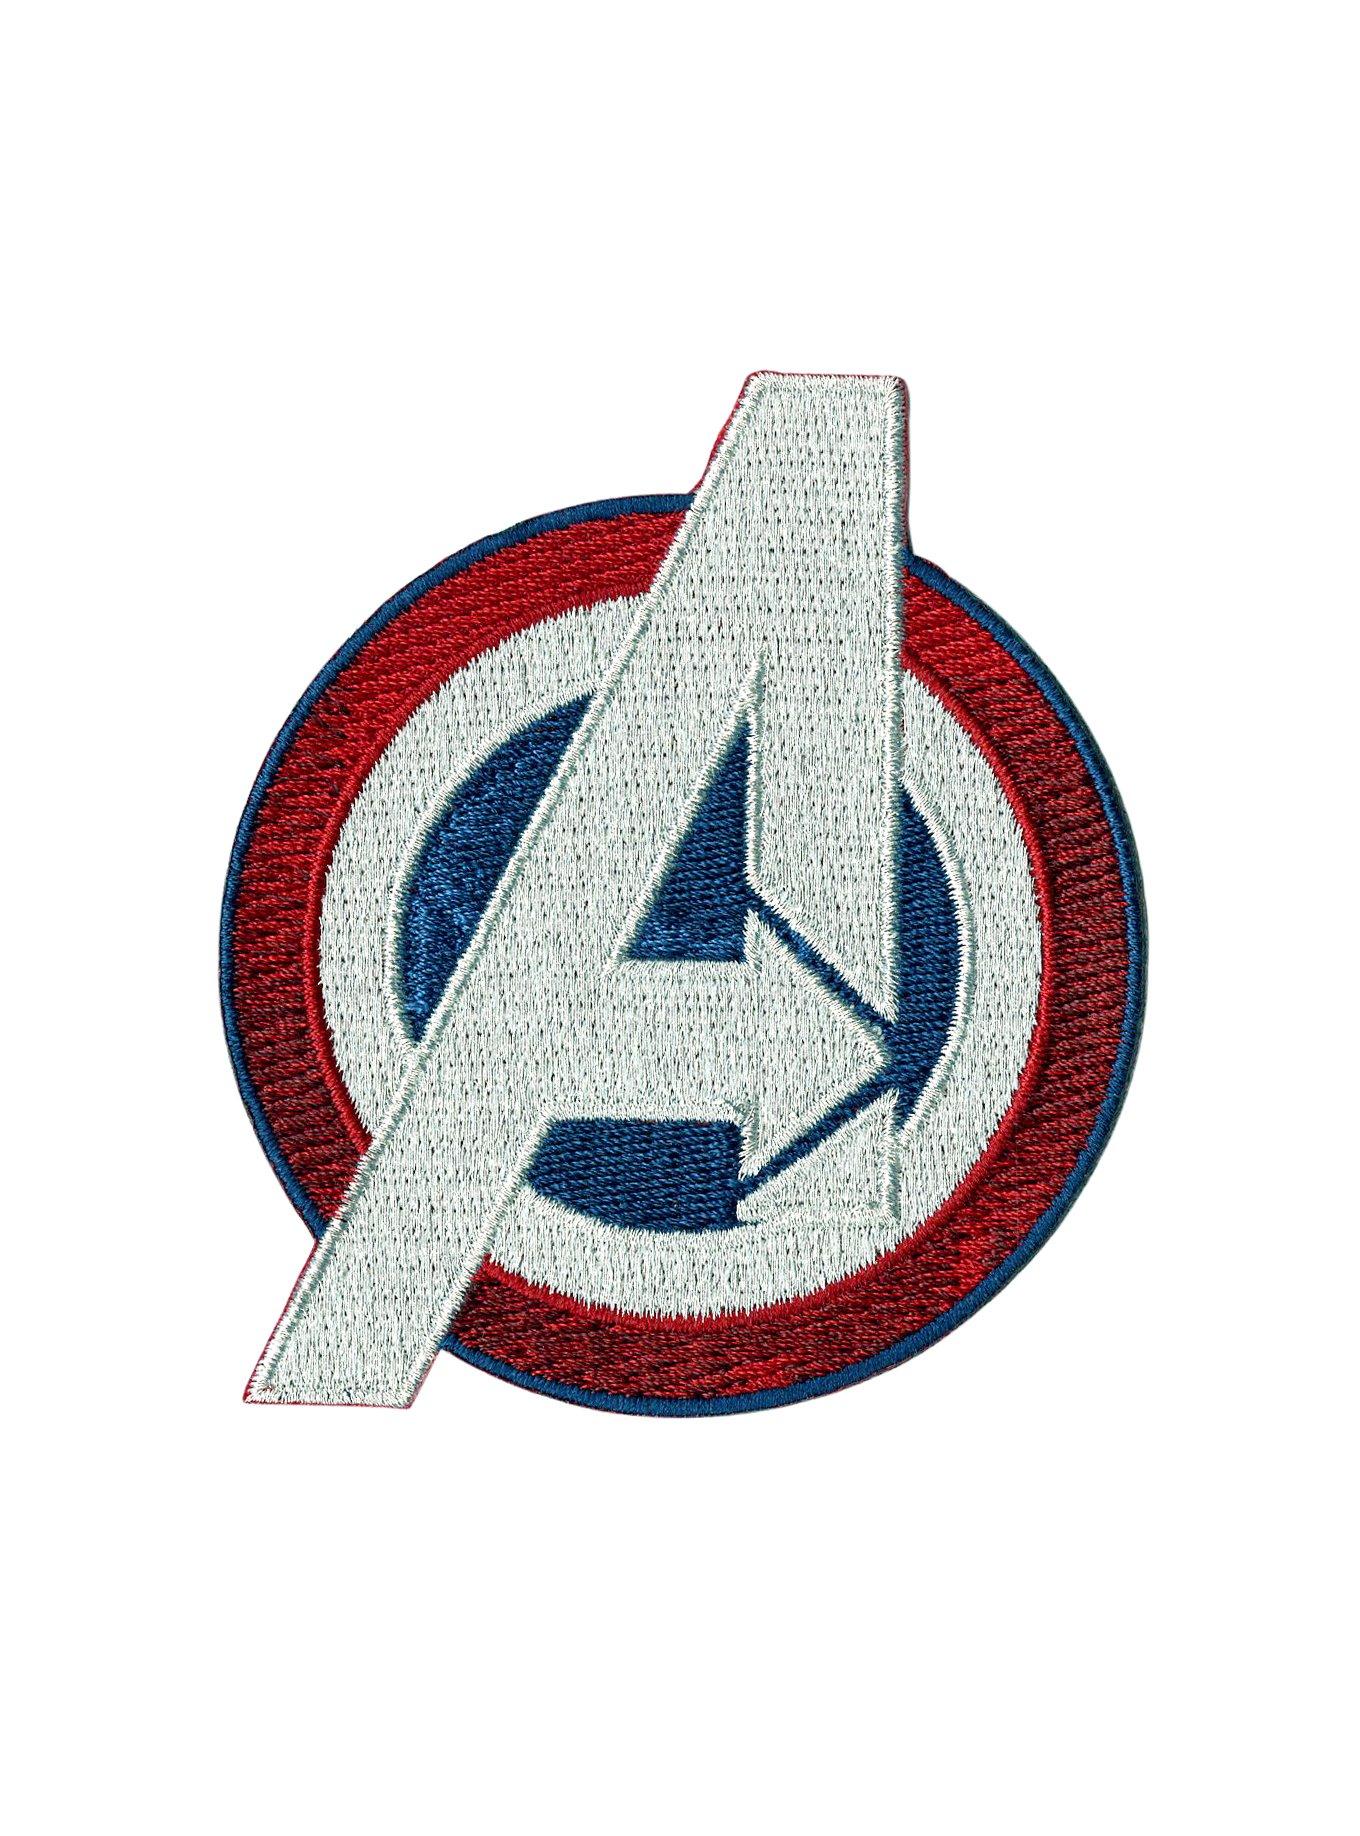 Star Lord Marvel Avengers Patch Design for Machine 